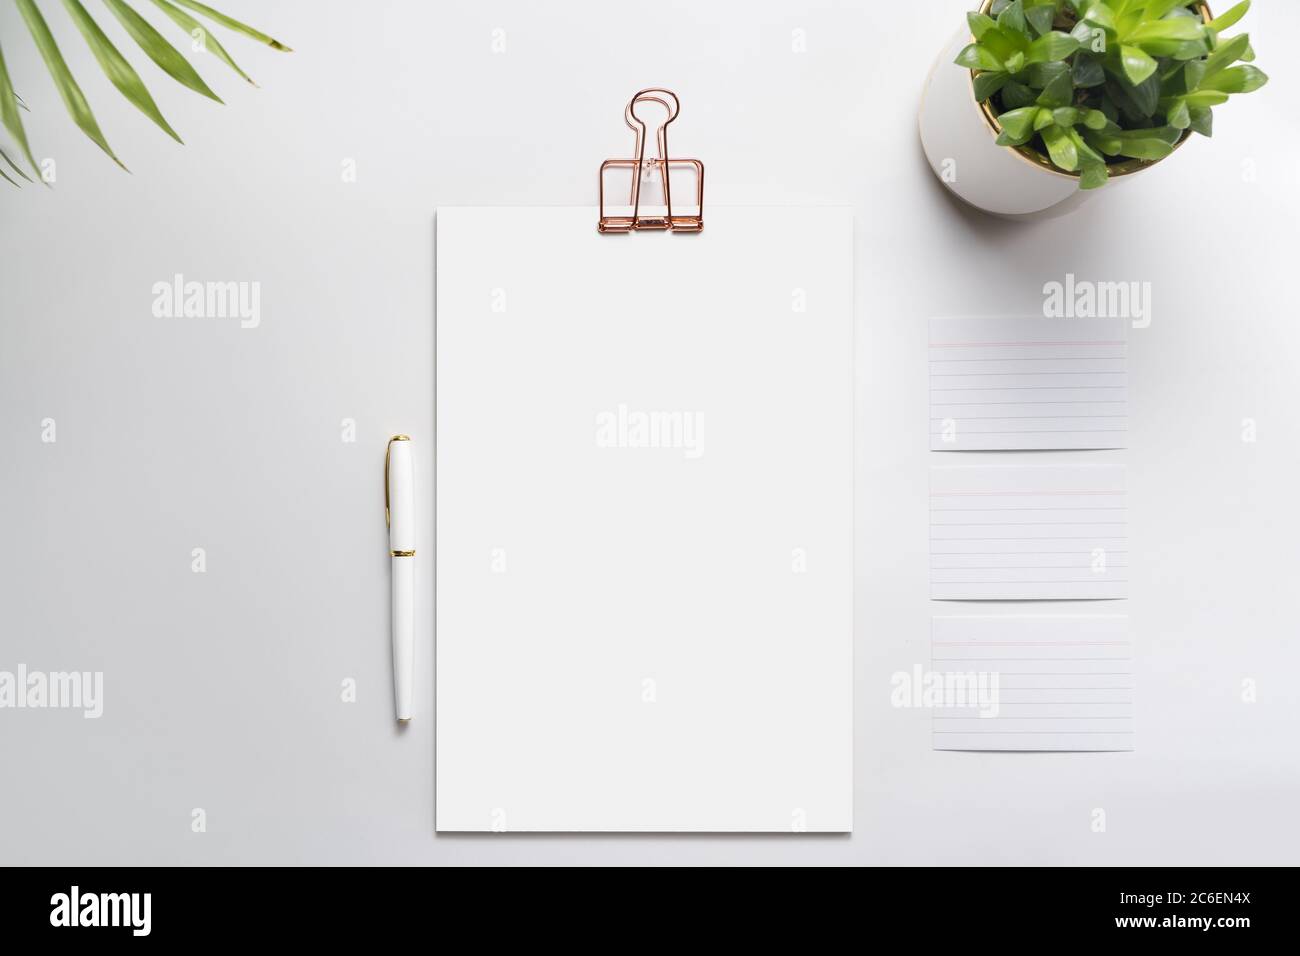 Blank corporate identity stationery set, personal branding mockup template. Sheets of paper, fountain pen and office supplies, decorated with green pl Stock Photo